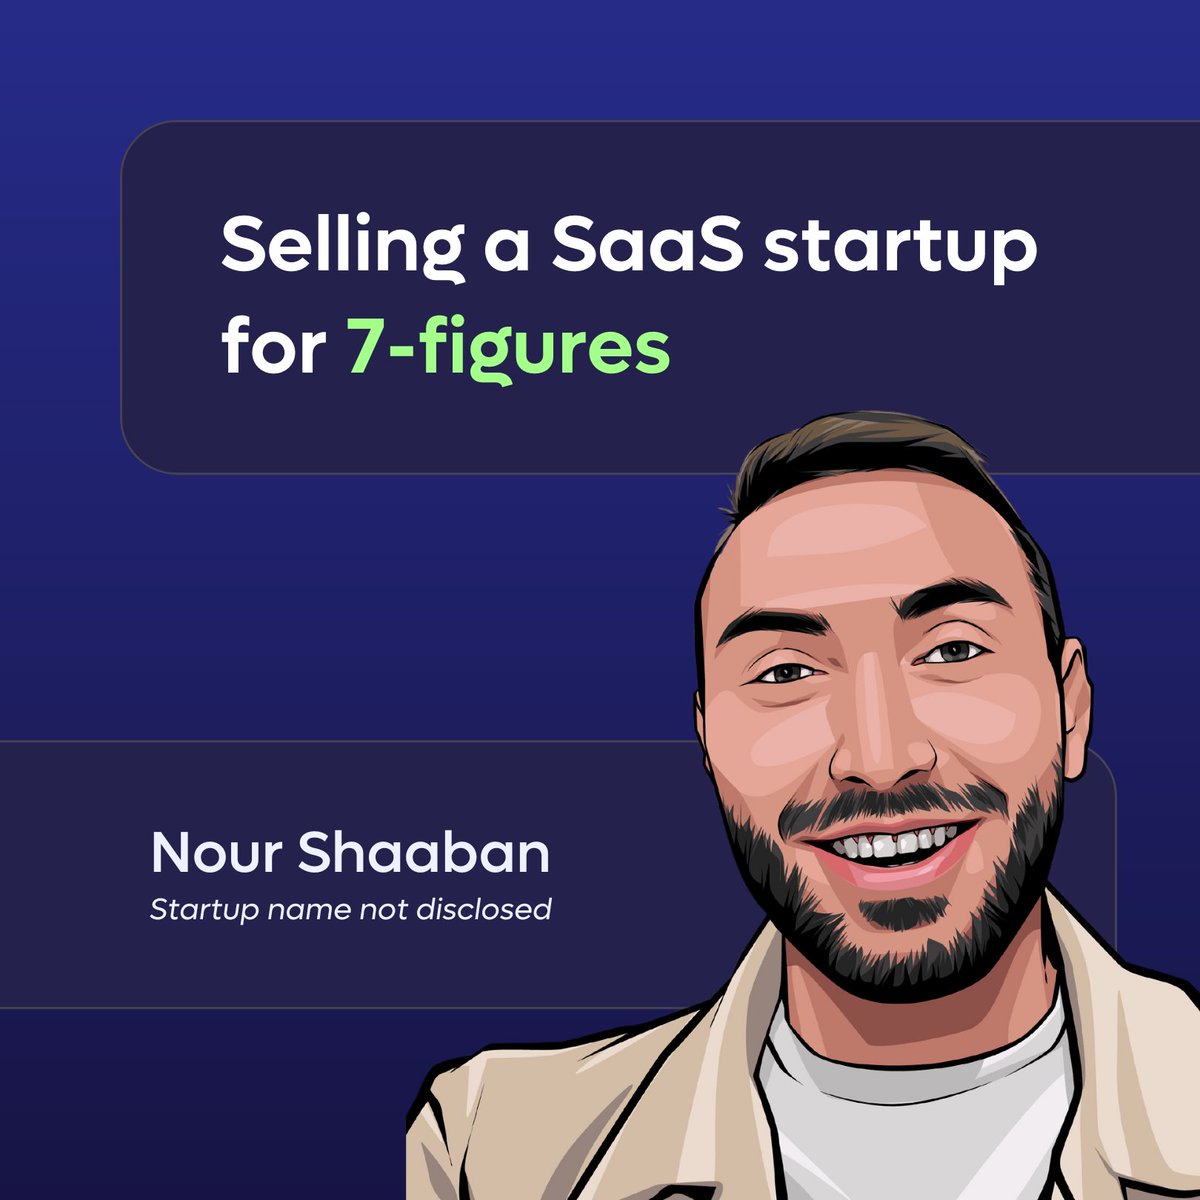 Nour Shaaban sold his SaaS on @acquiredotcom for 7 figures. While he can’t reveal details (NDA), he shared his experience building and selling his business on our podcast. Listen to Nour's advice to other entrepreneurs trying to create a 7-figure exit: blog.acquire.com/startup-acquis…